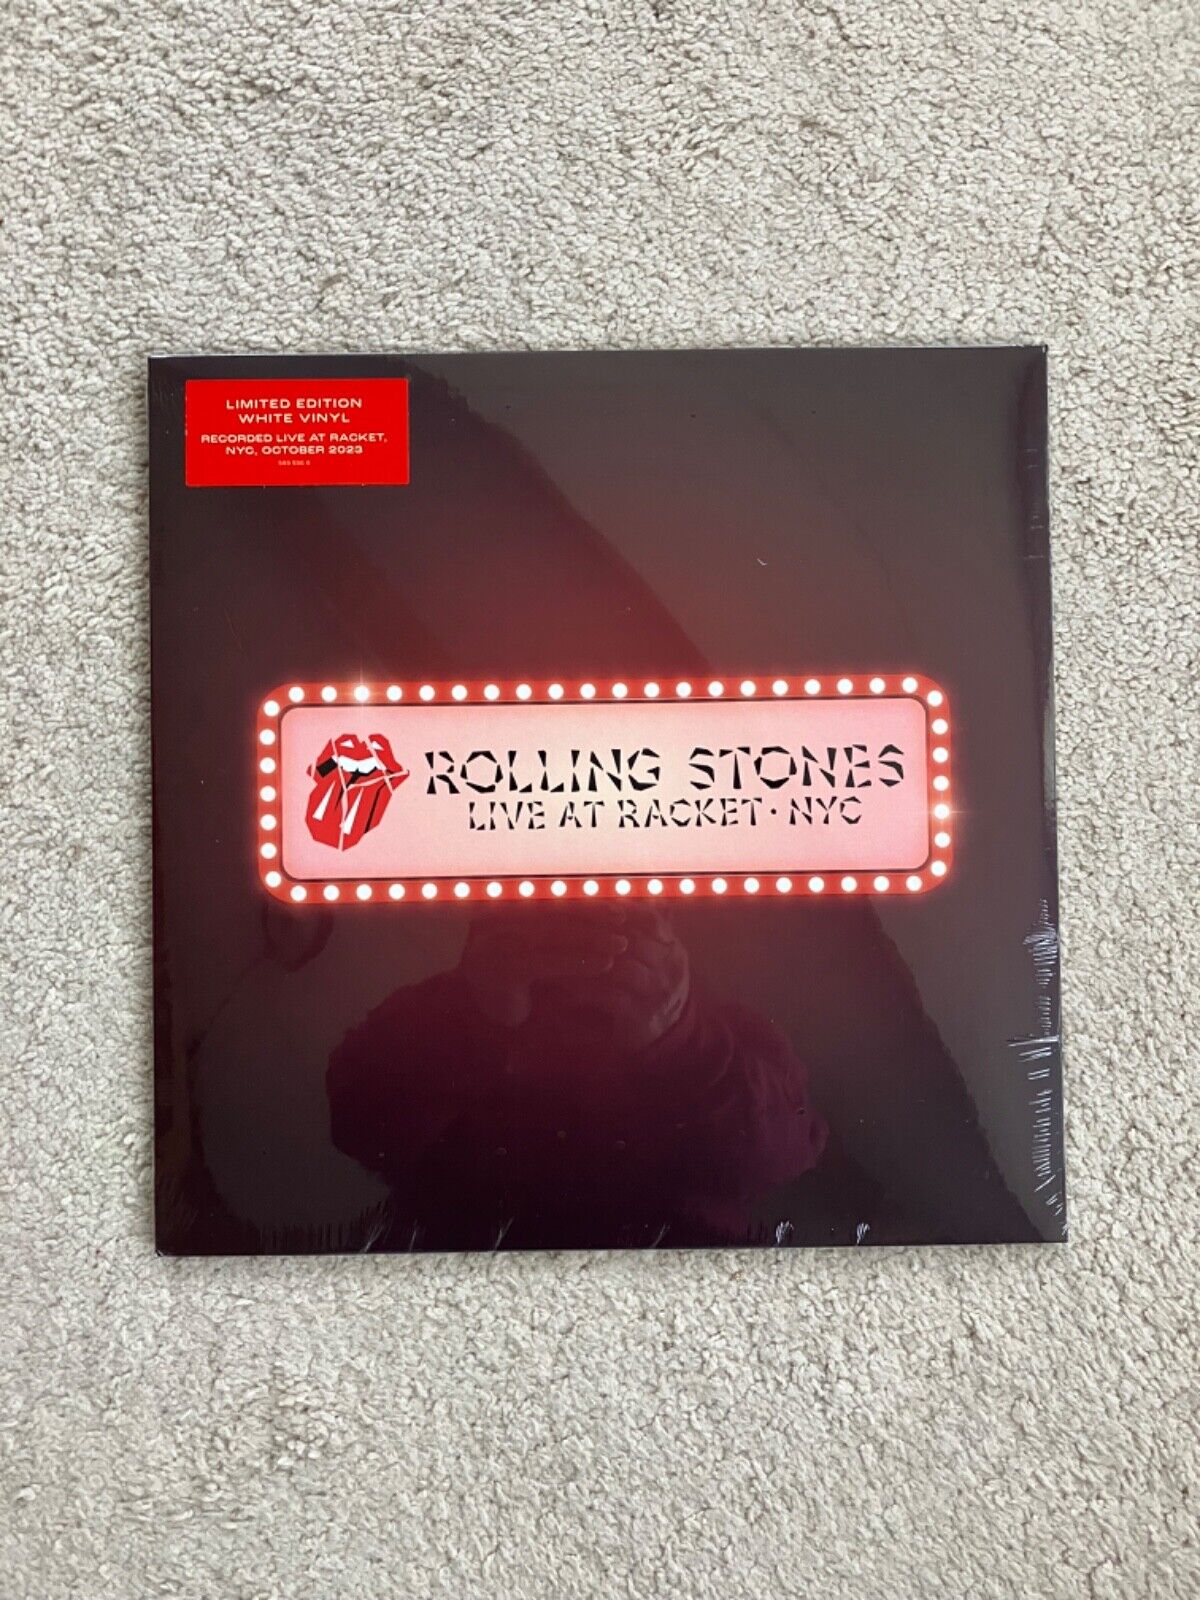 The Rolling Stones – Live At Racket NYC" - White Vinyl -RSD-BRAND NEW,SEALED